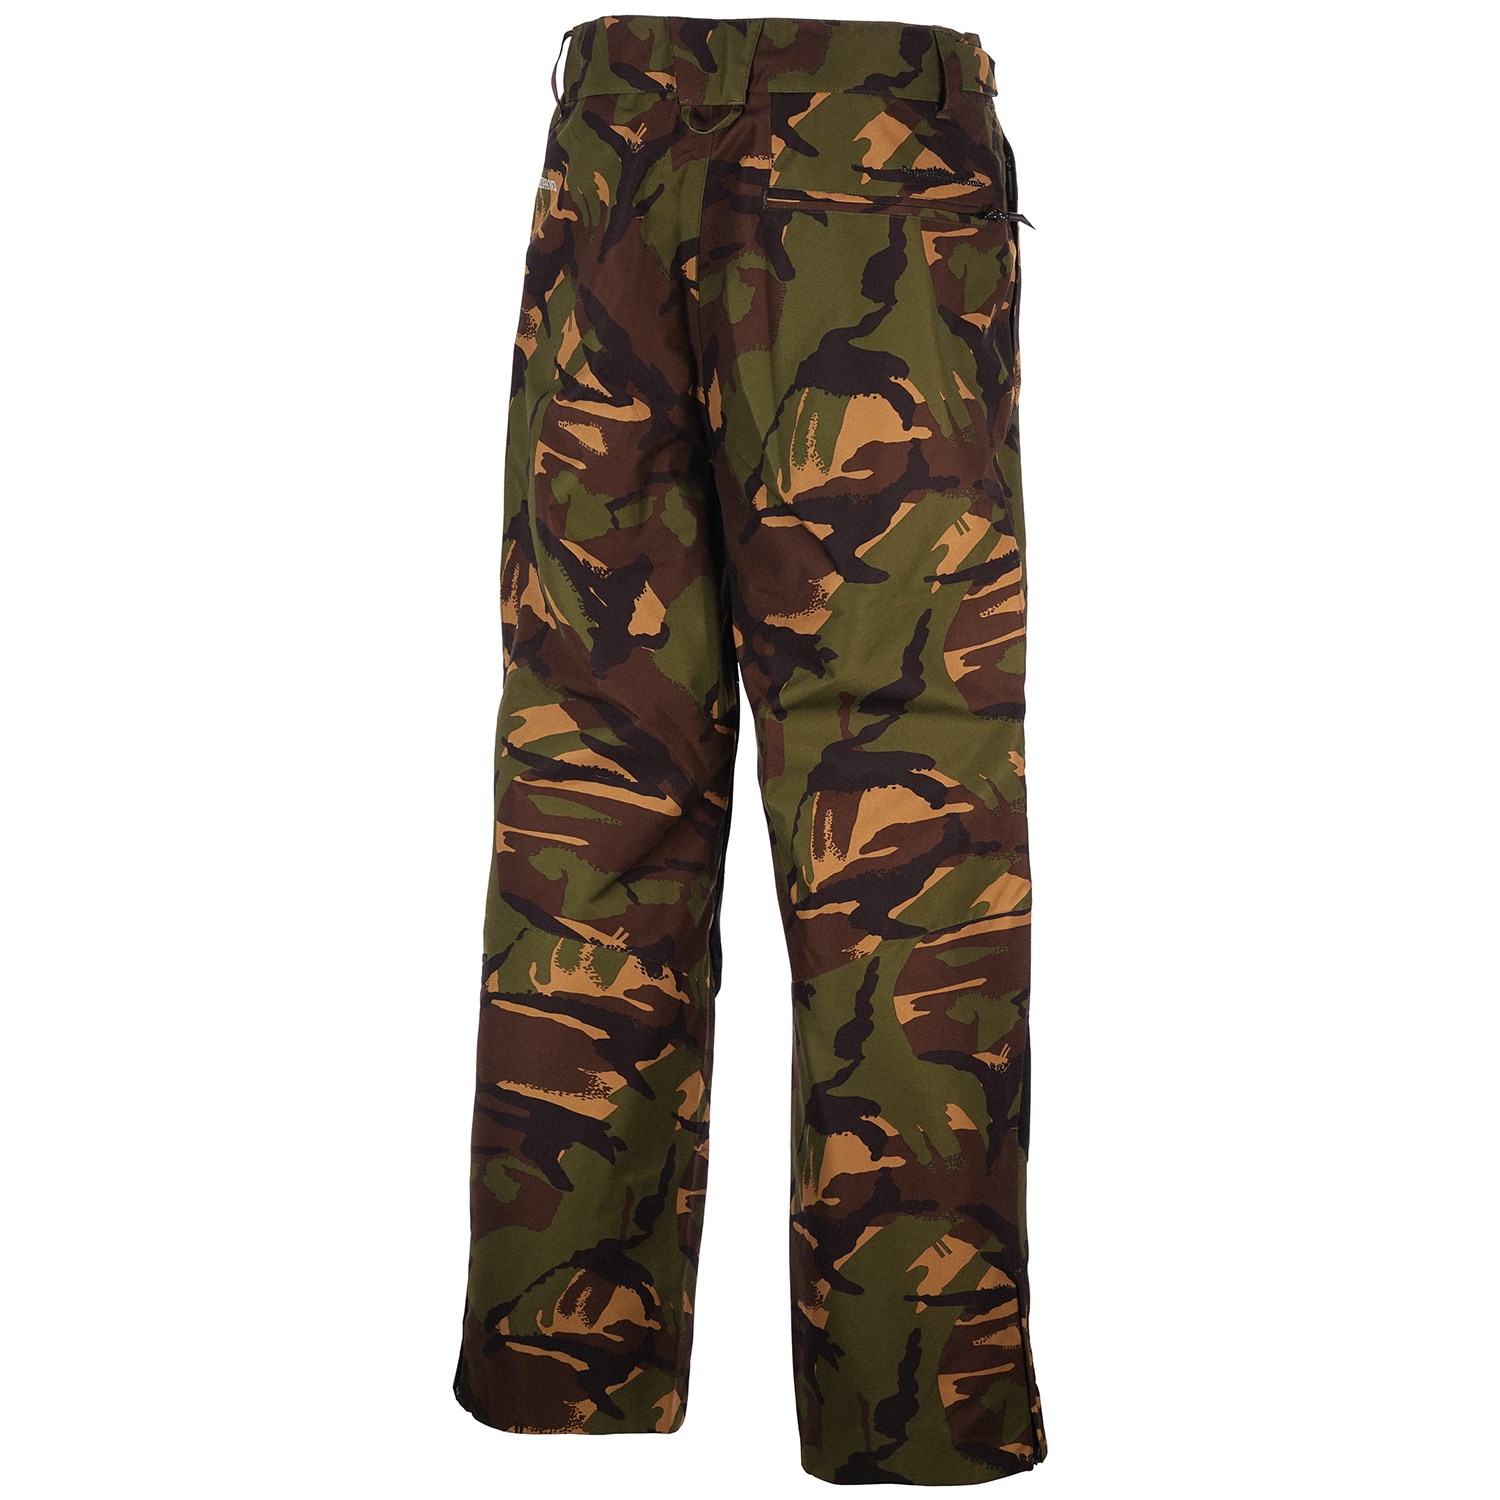 Planks easy rider ski trousers in sage green